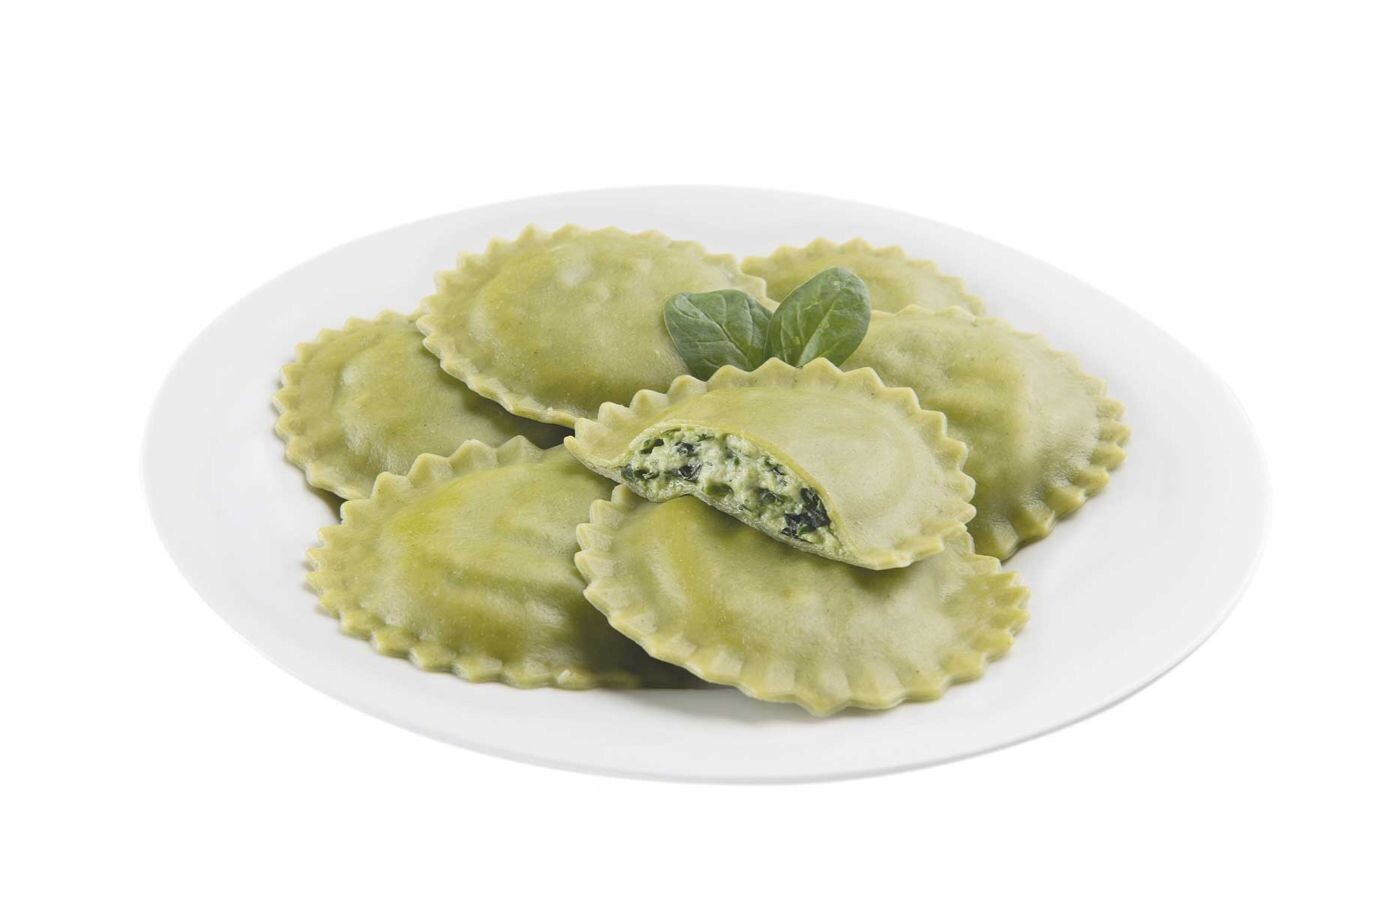 Jumbo Round Spinach Ravioli Package 12-Count 13 oz (369g)